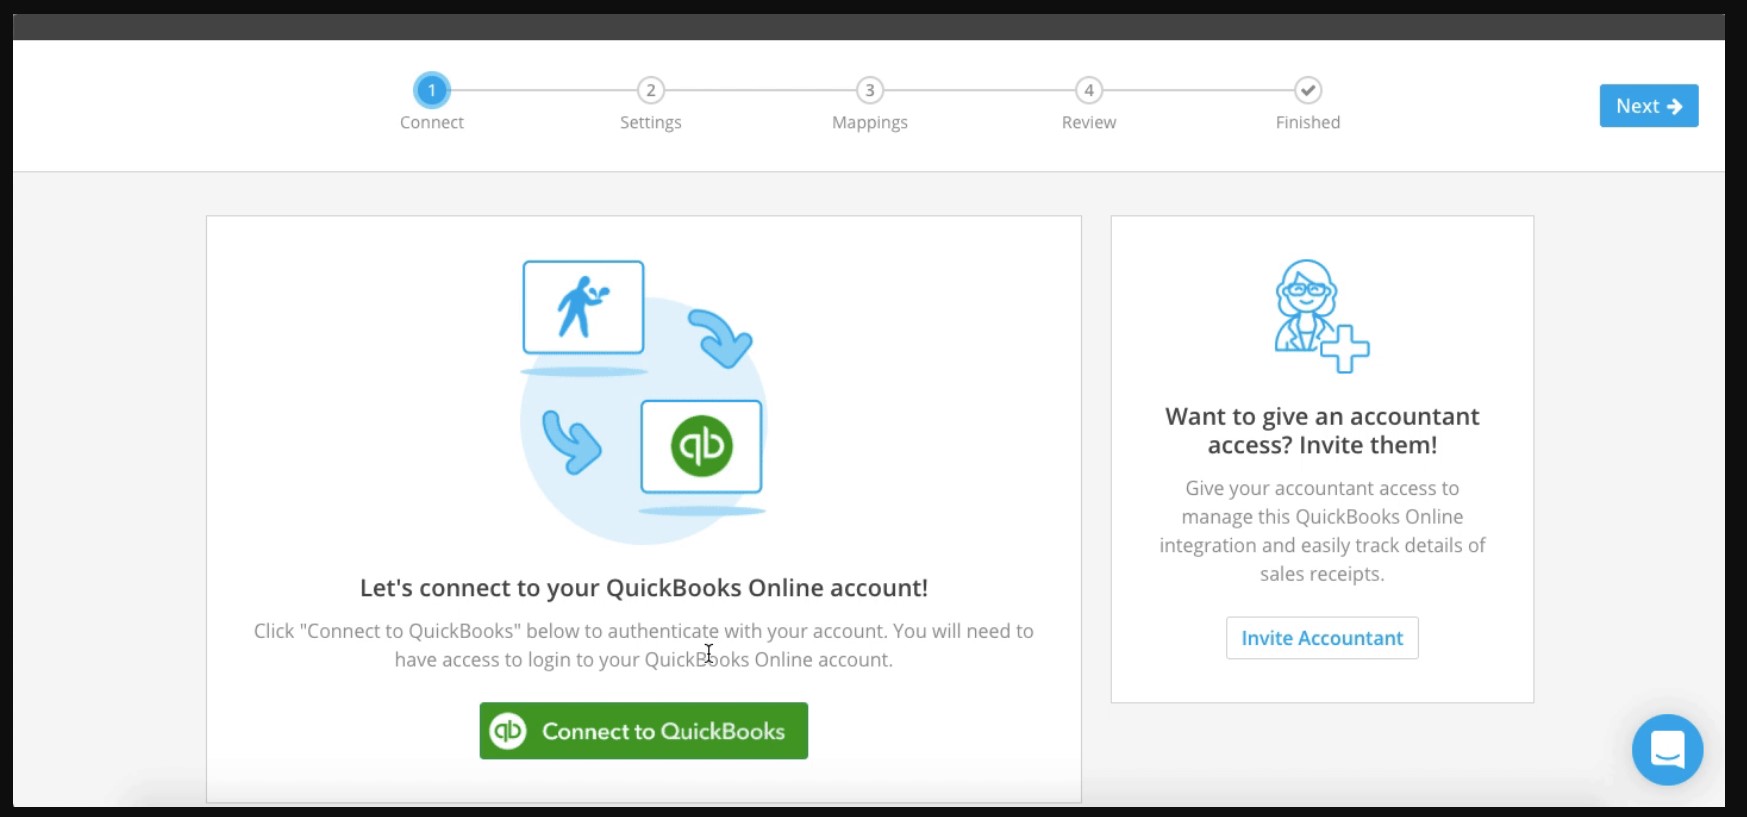 Quickbooks + Network for Good 101: How to Convert from Desktop to Online